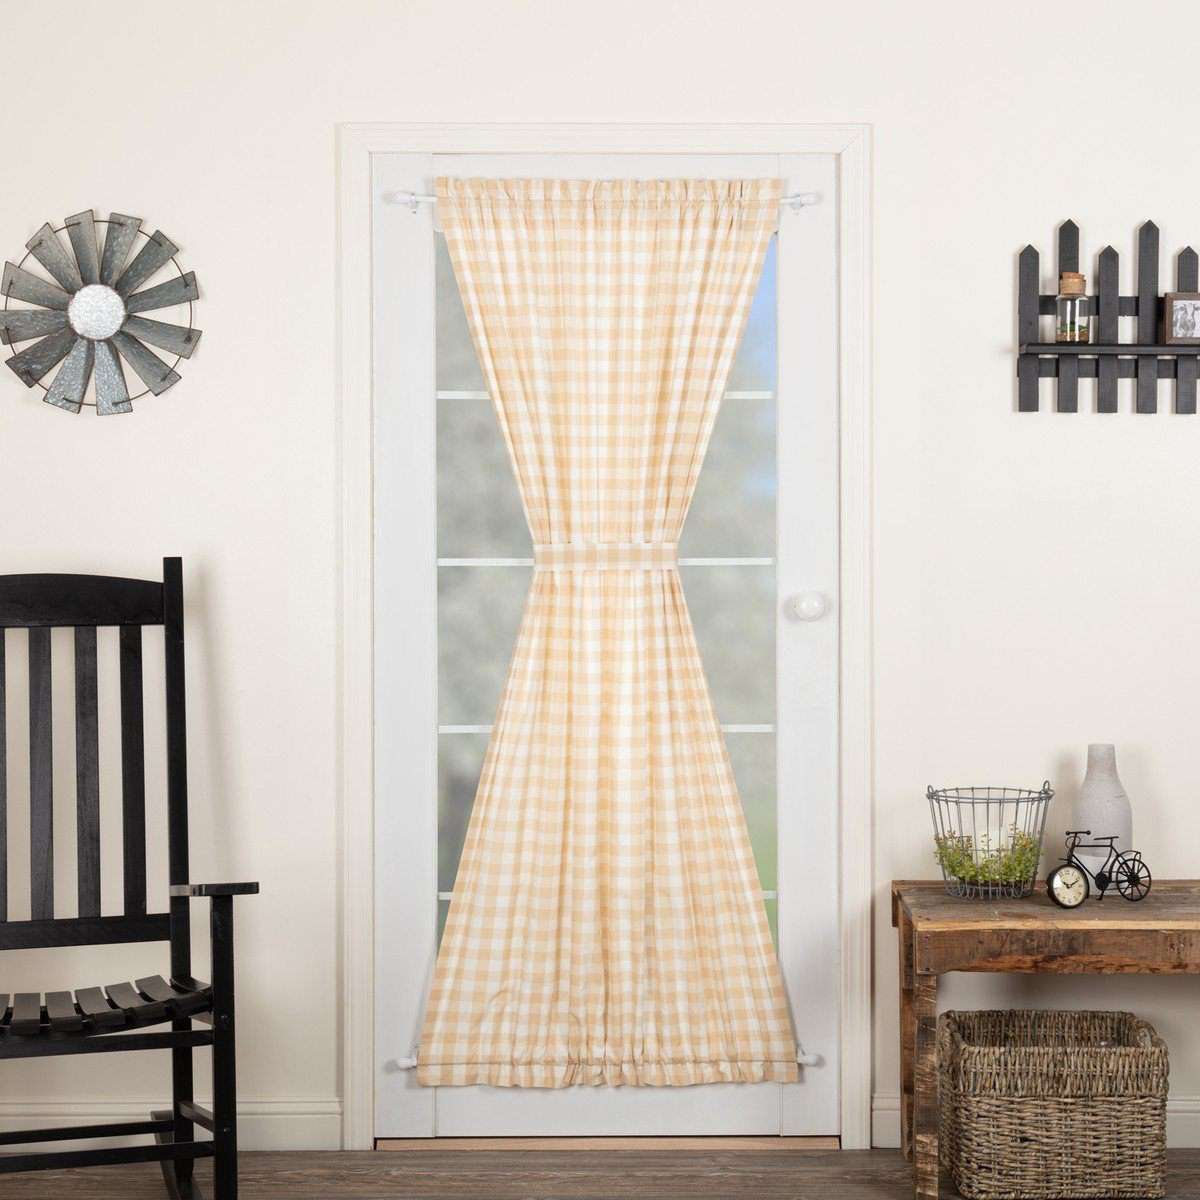 Annie Buffalo Black/Grey/Red/Tan Check Door Panel 72x40 curtain VHC Brands 